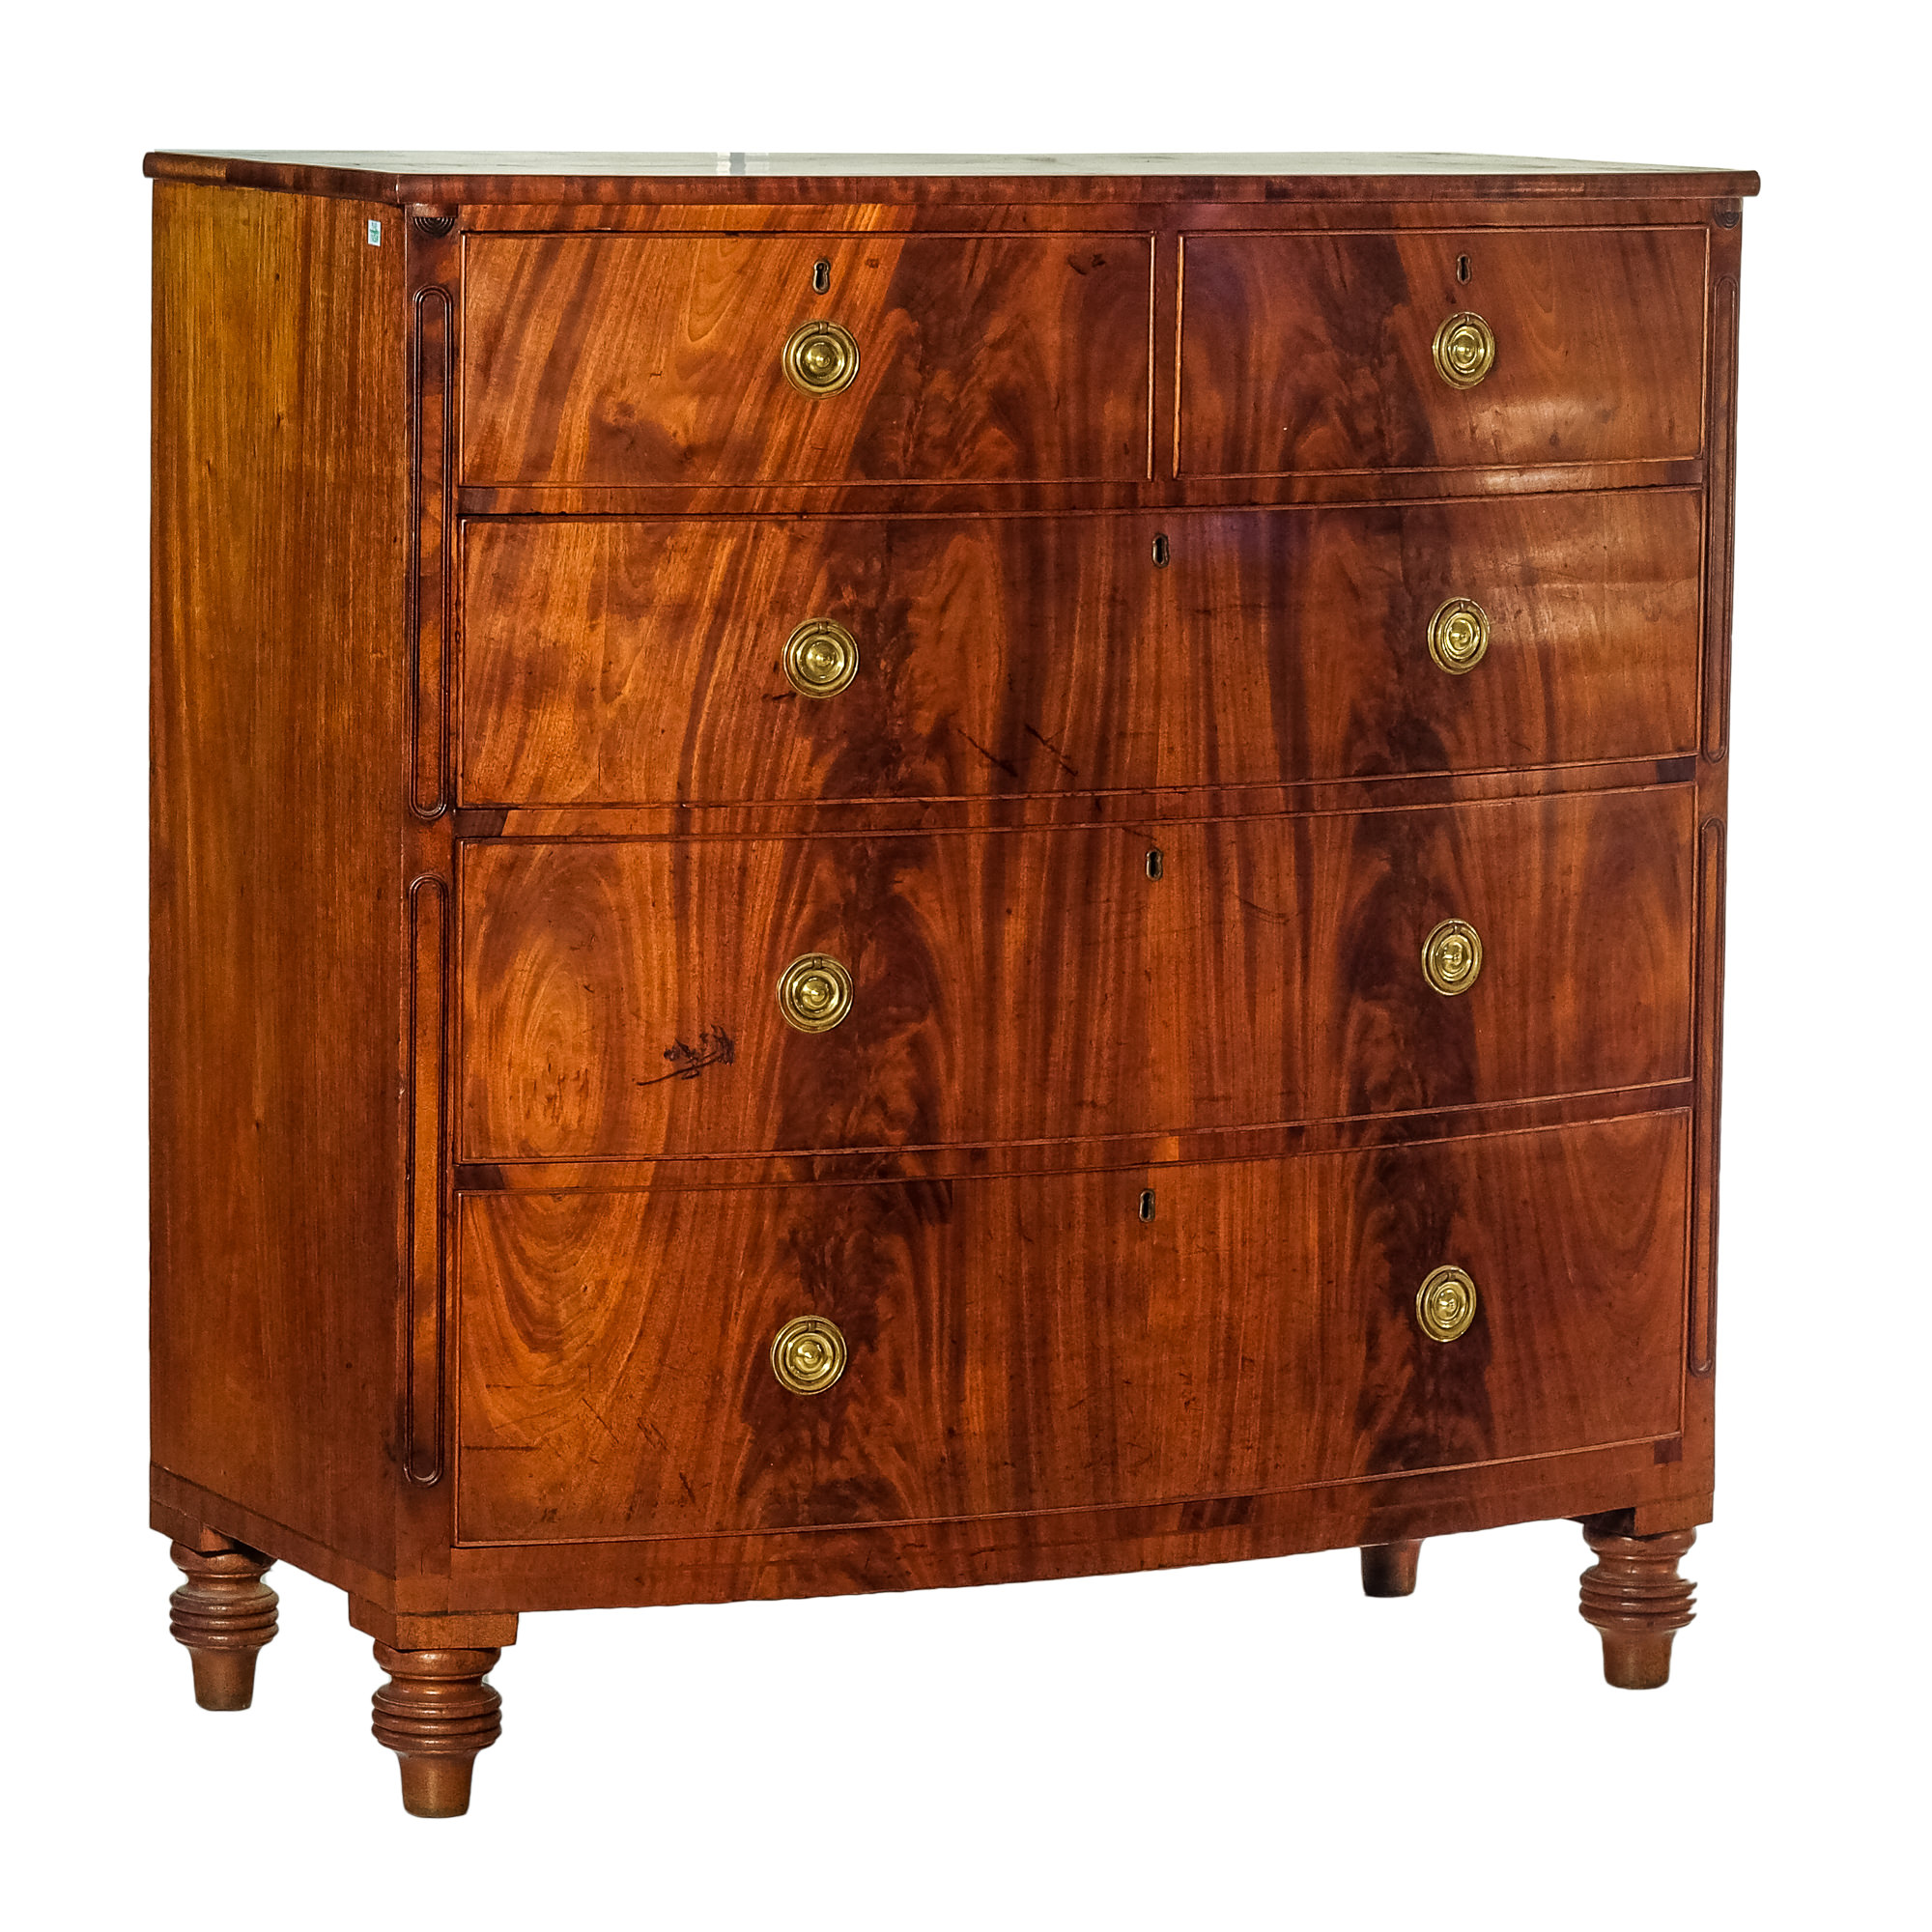 'George IV Flame Mahogany Chest of Drawers Circa 1830'